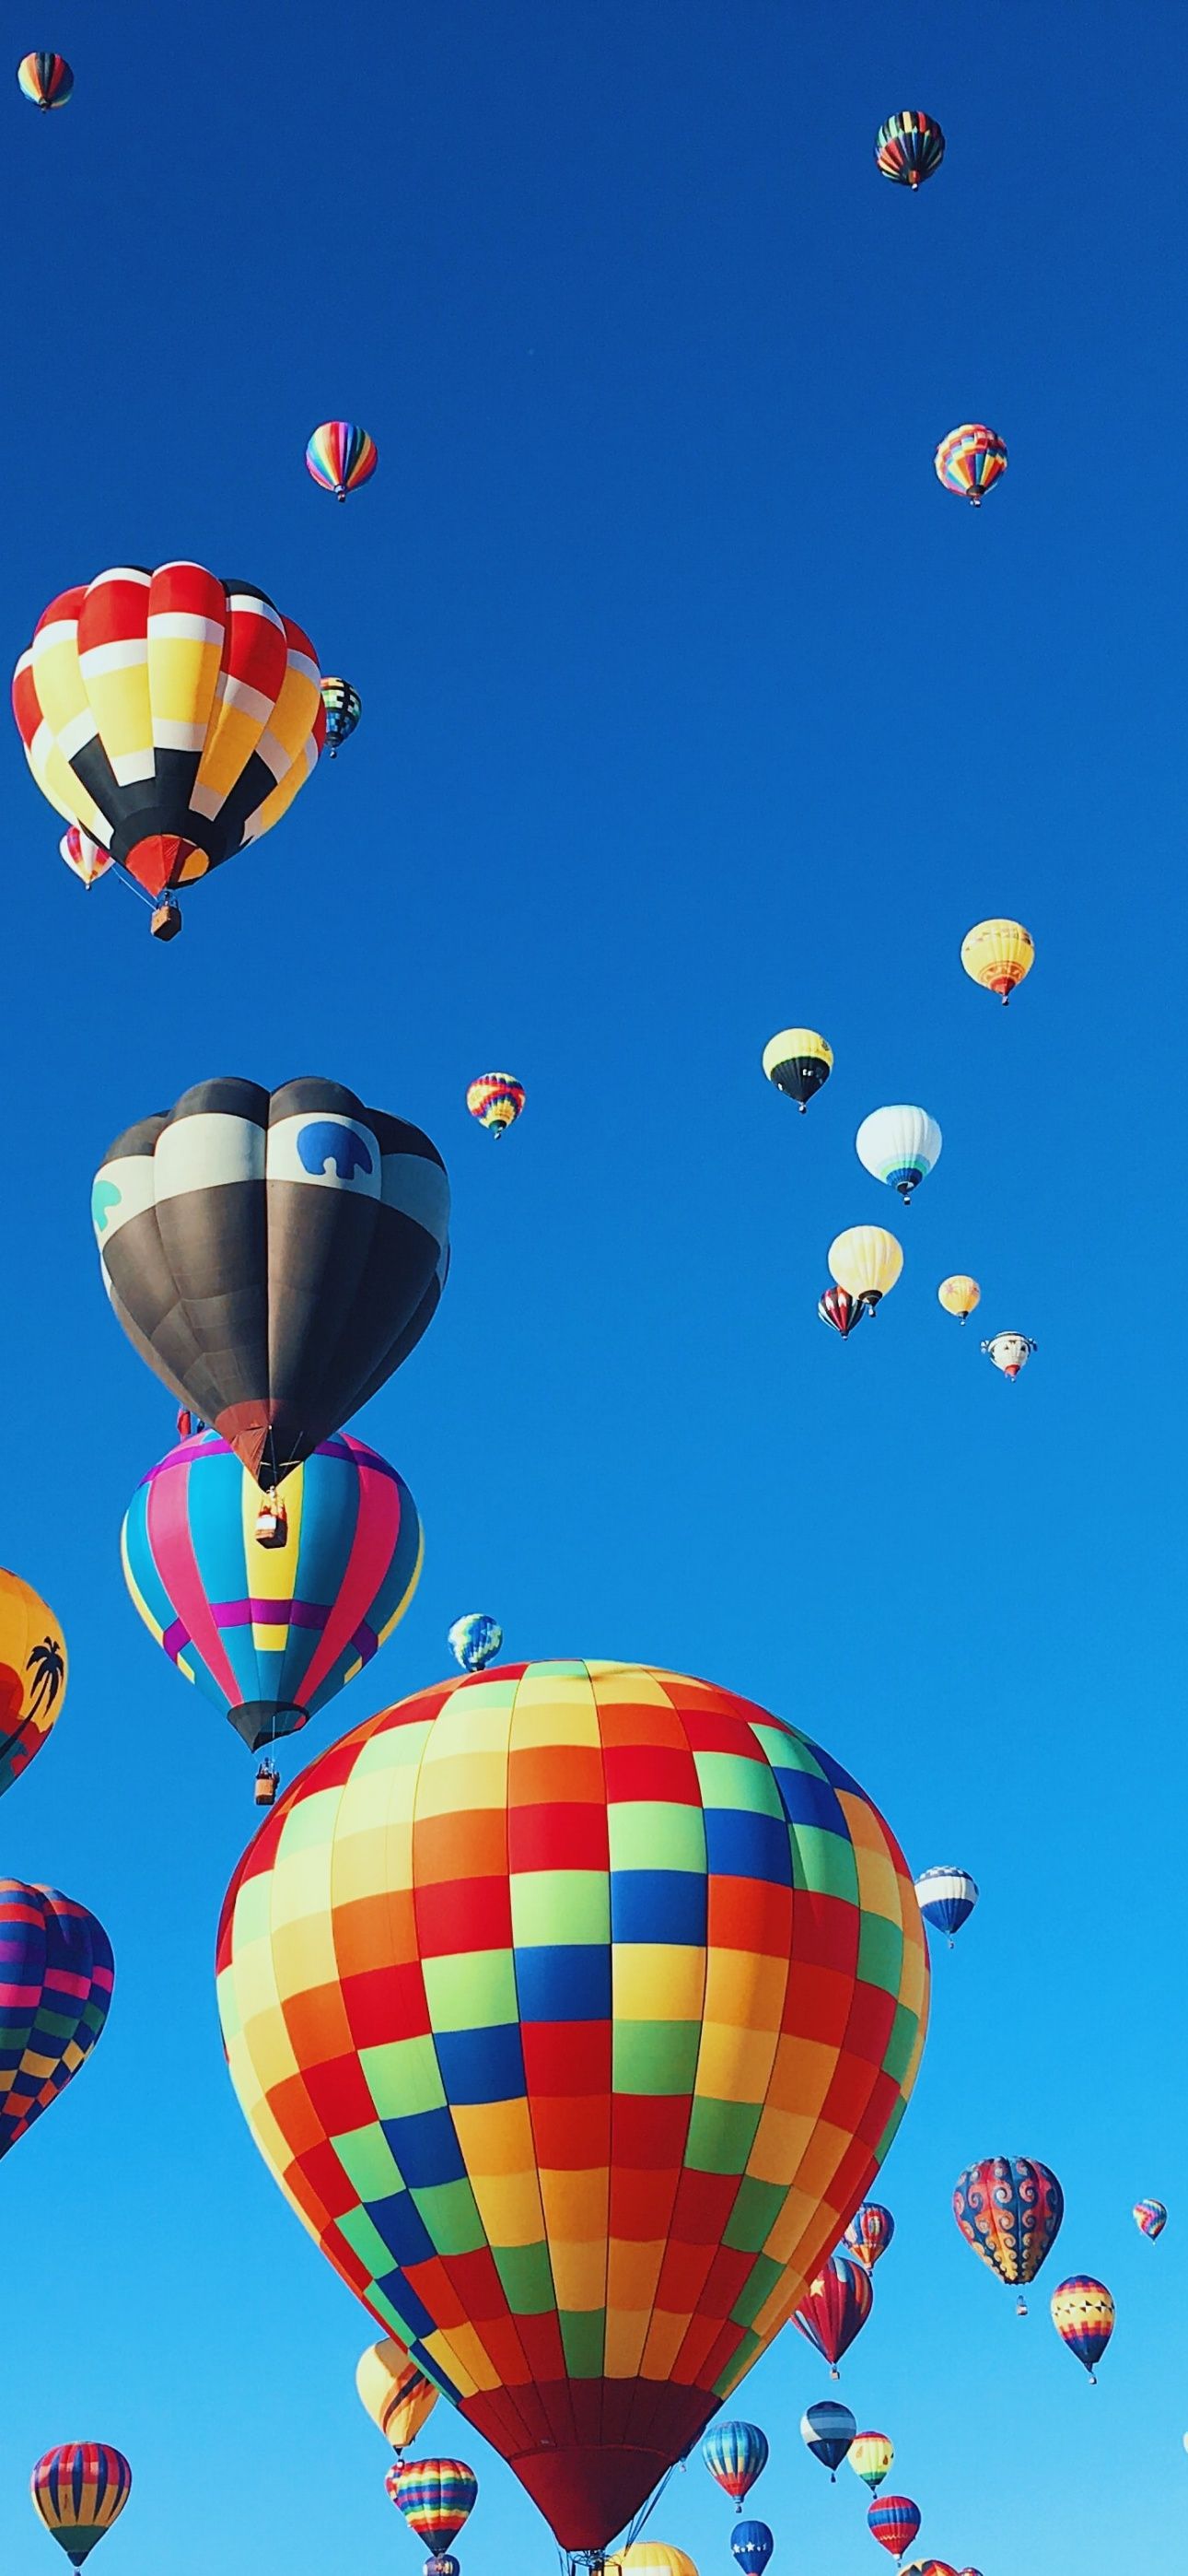 Colorful hot air balloons in the blue sky - Balloons, travel, hot air balloons